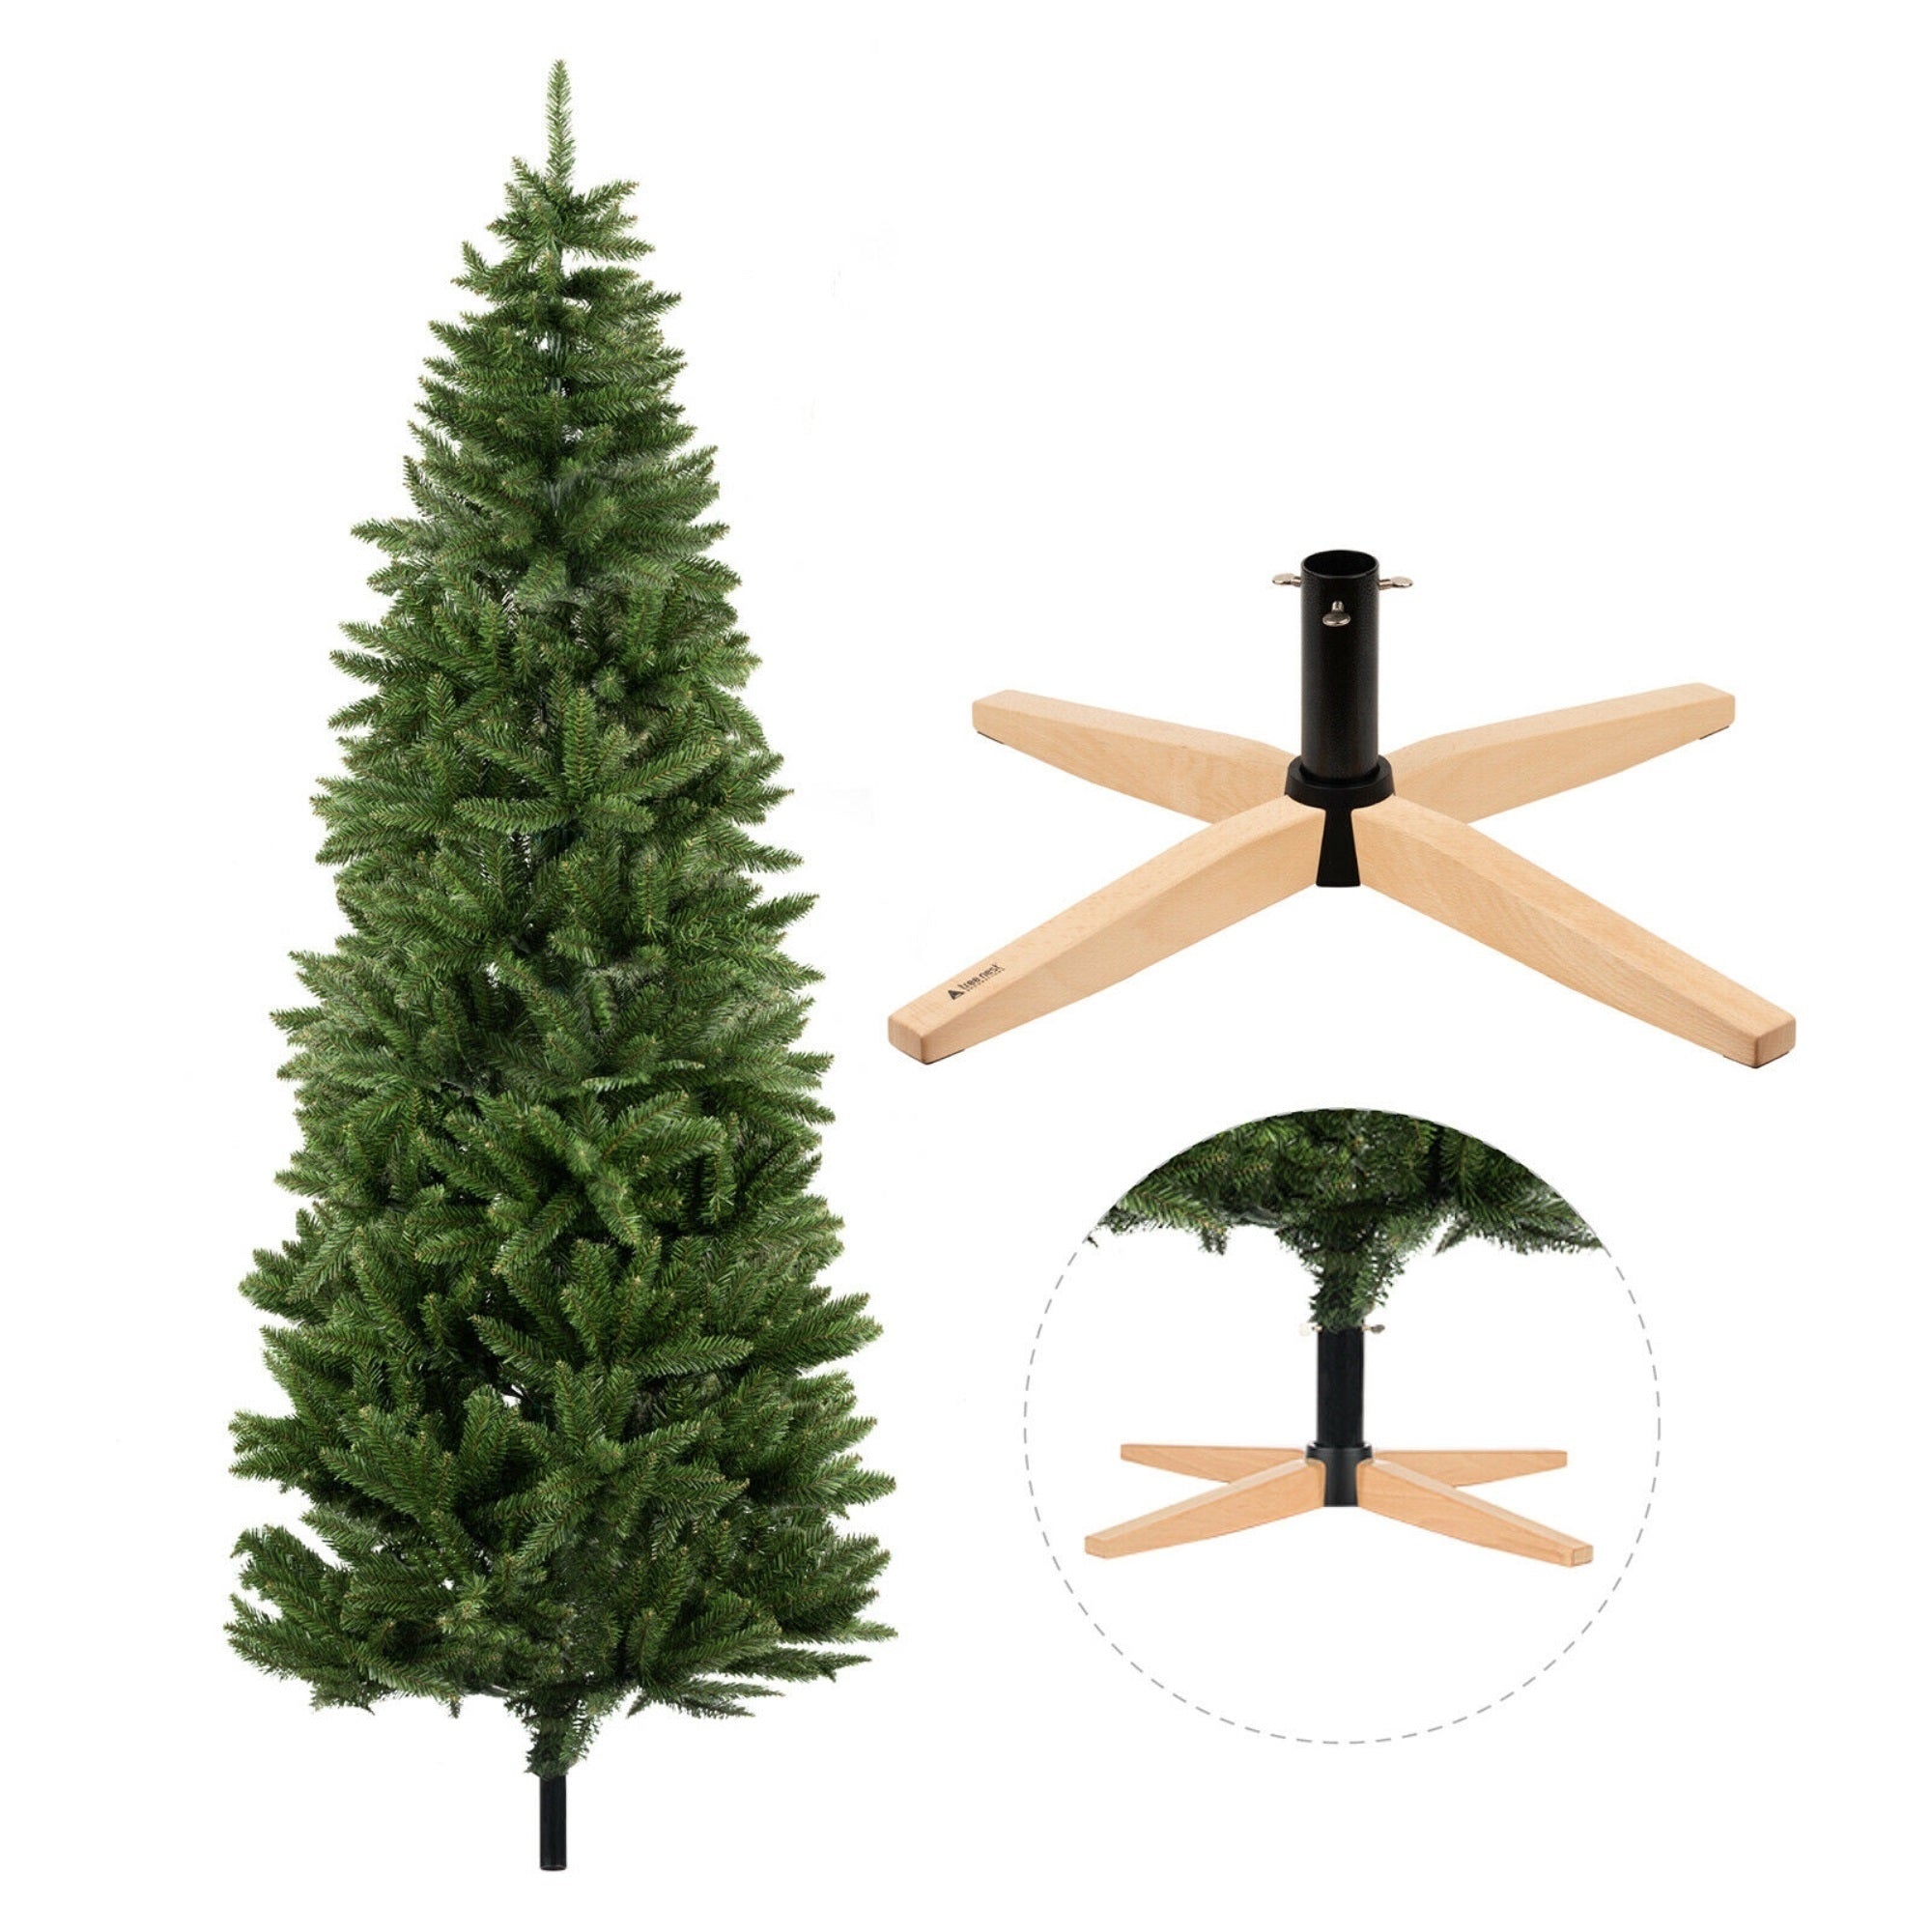 Tree Nest Artificial Christmas Tree with Wooden Stand, 6.5 feet